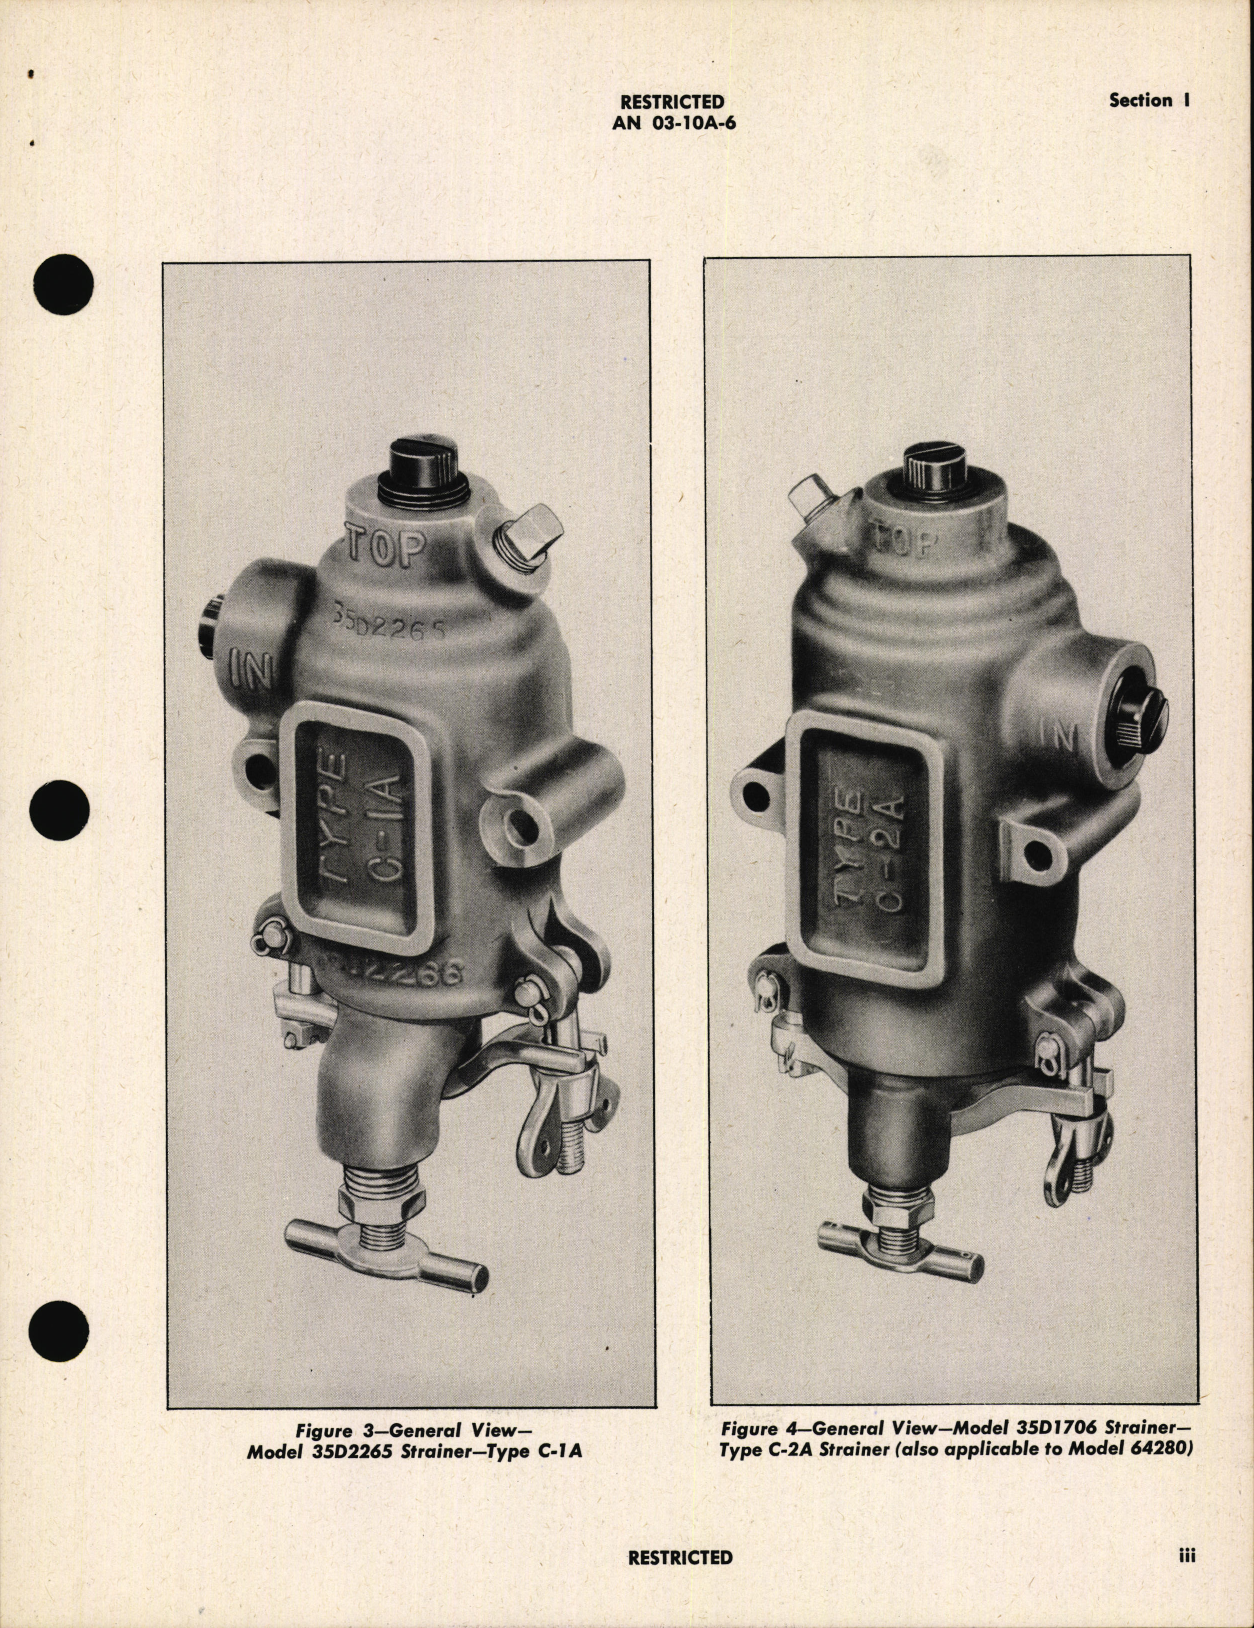 Sample page 5 from AirCorps Library document: Handbook of Instructions with Parts Catalog for Fuel System Units, Hand Fuel Pumps, Fuel System Strainers, and Relief Valves